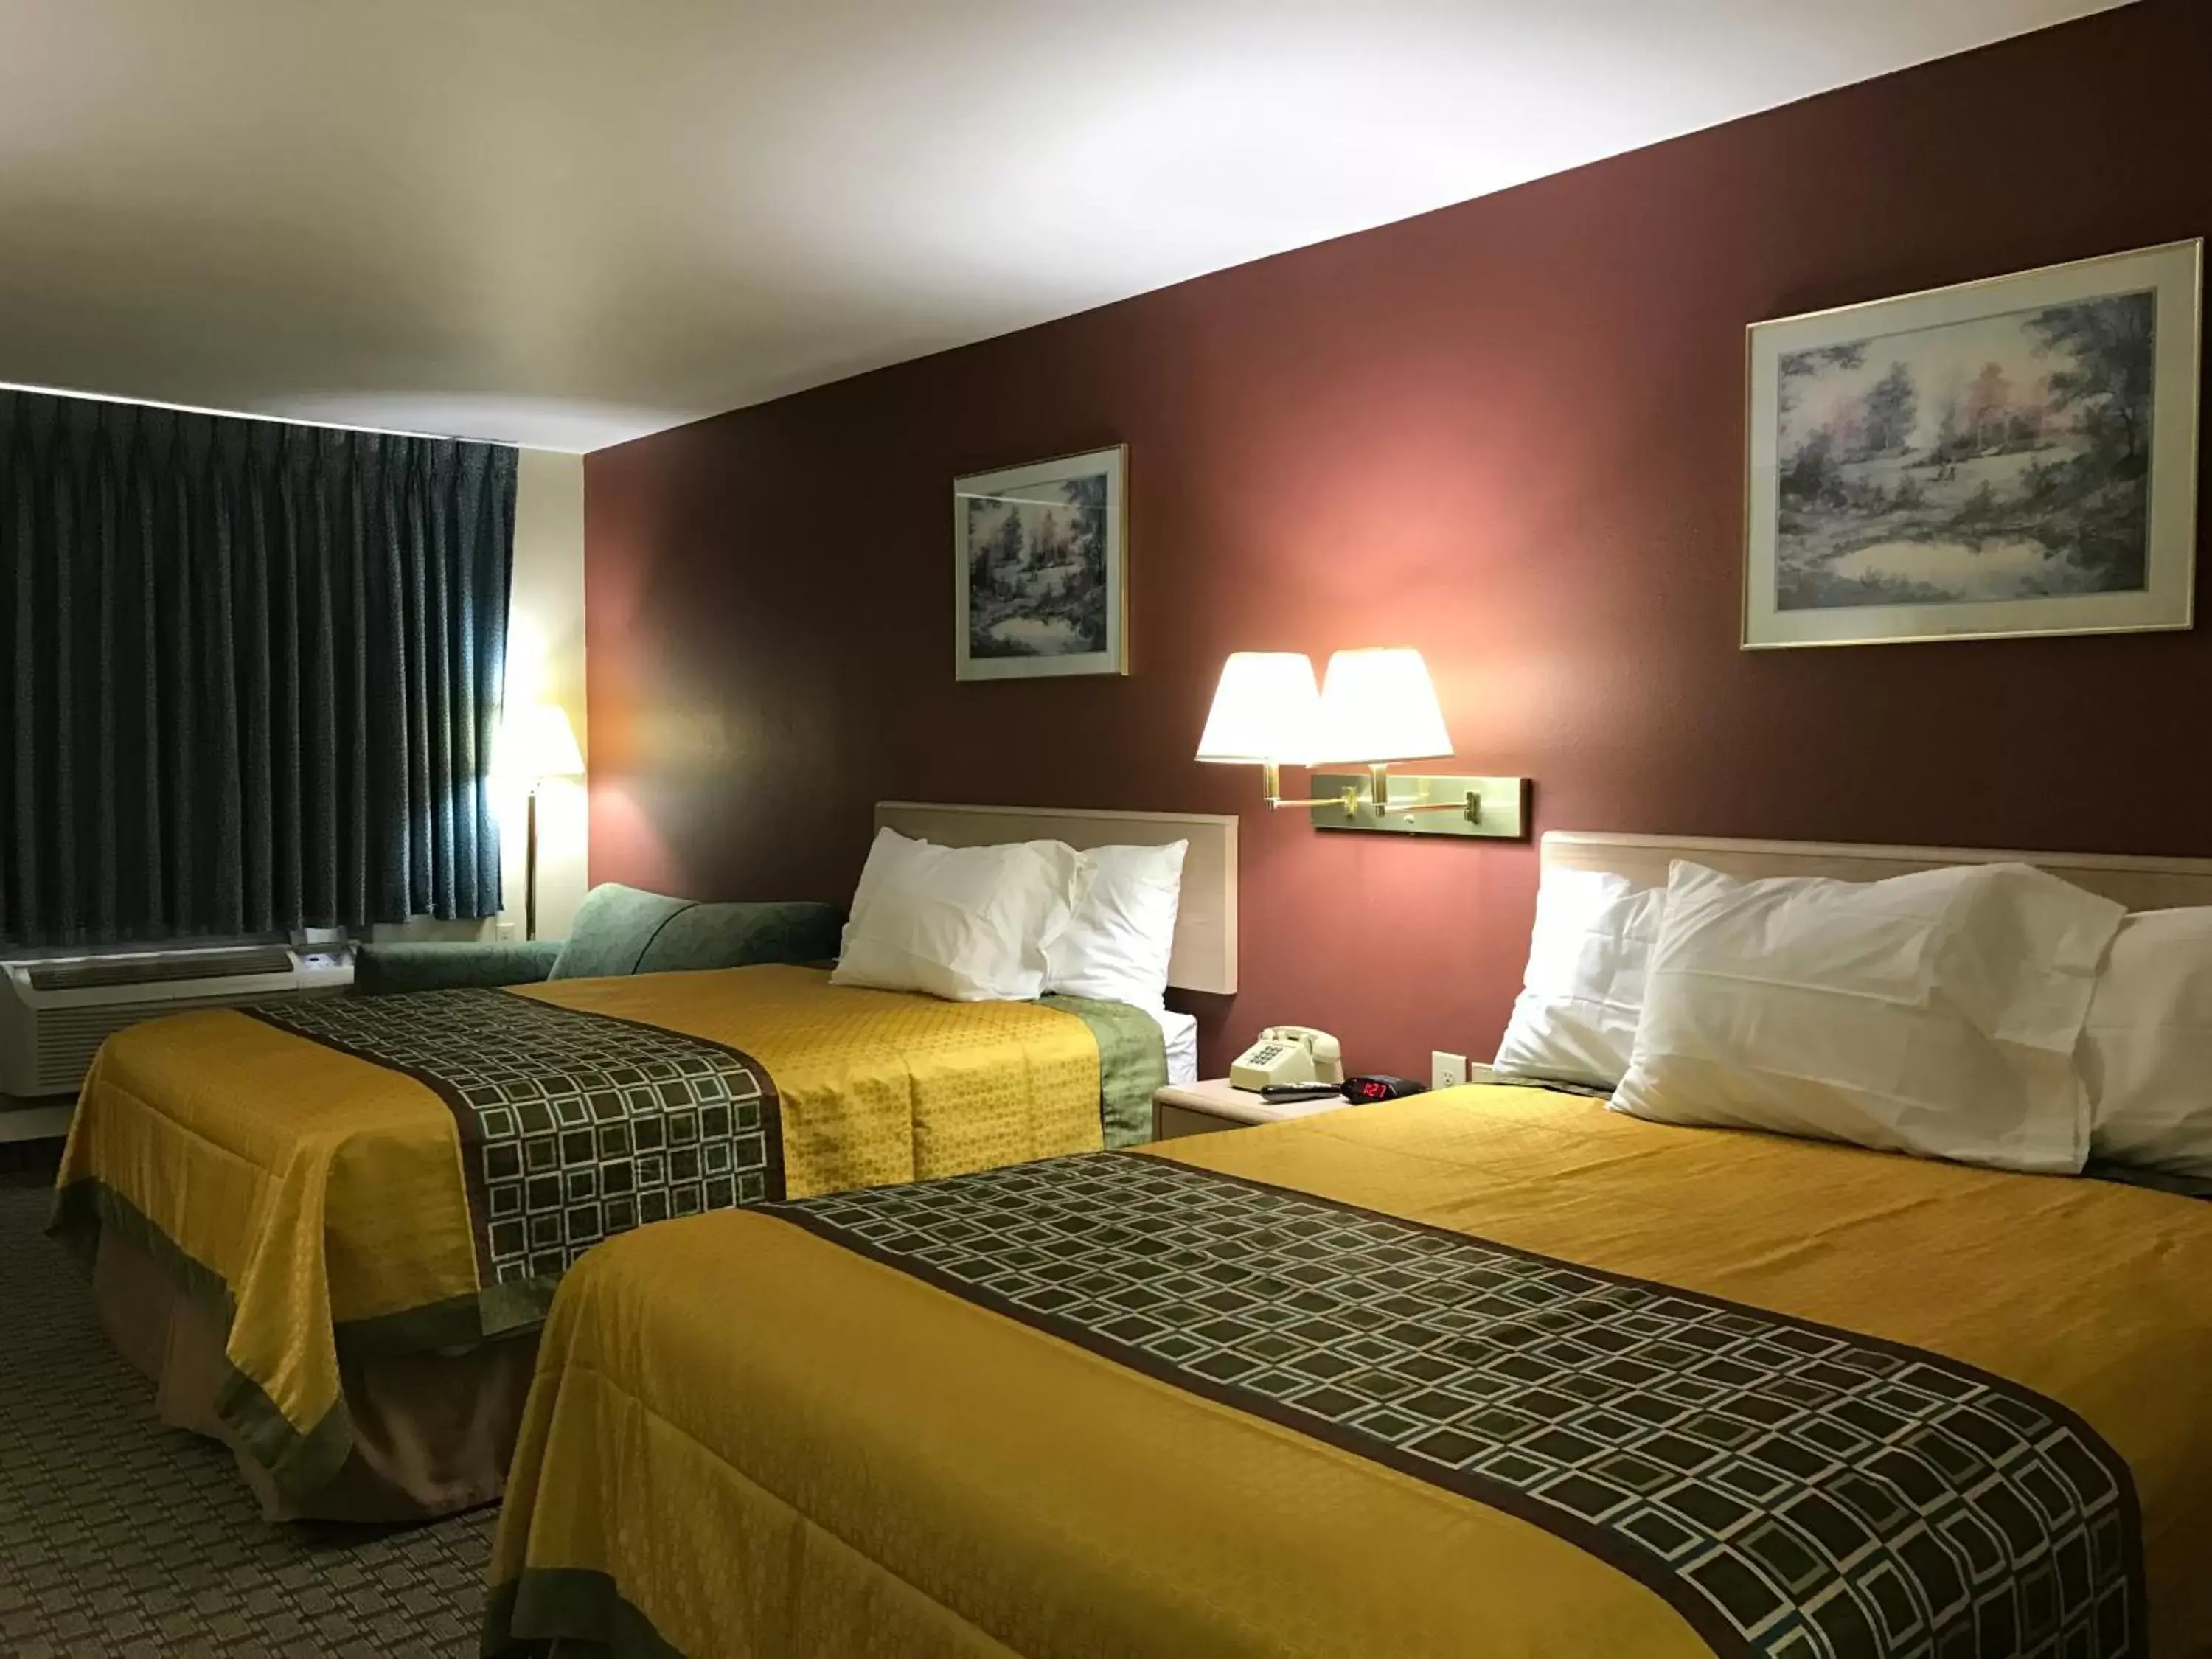 Property building, Room Photo in Americas Best Value Inn Cabot